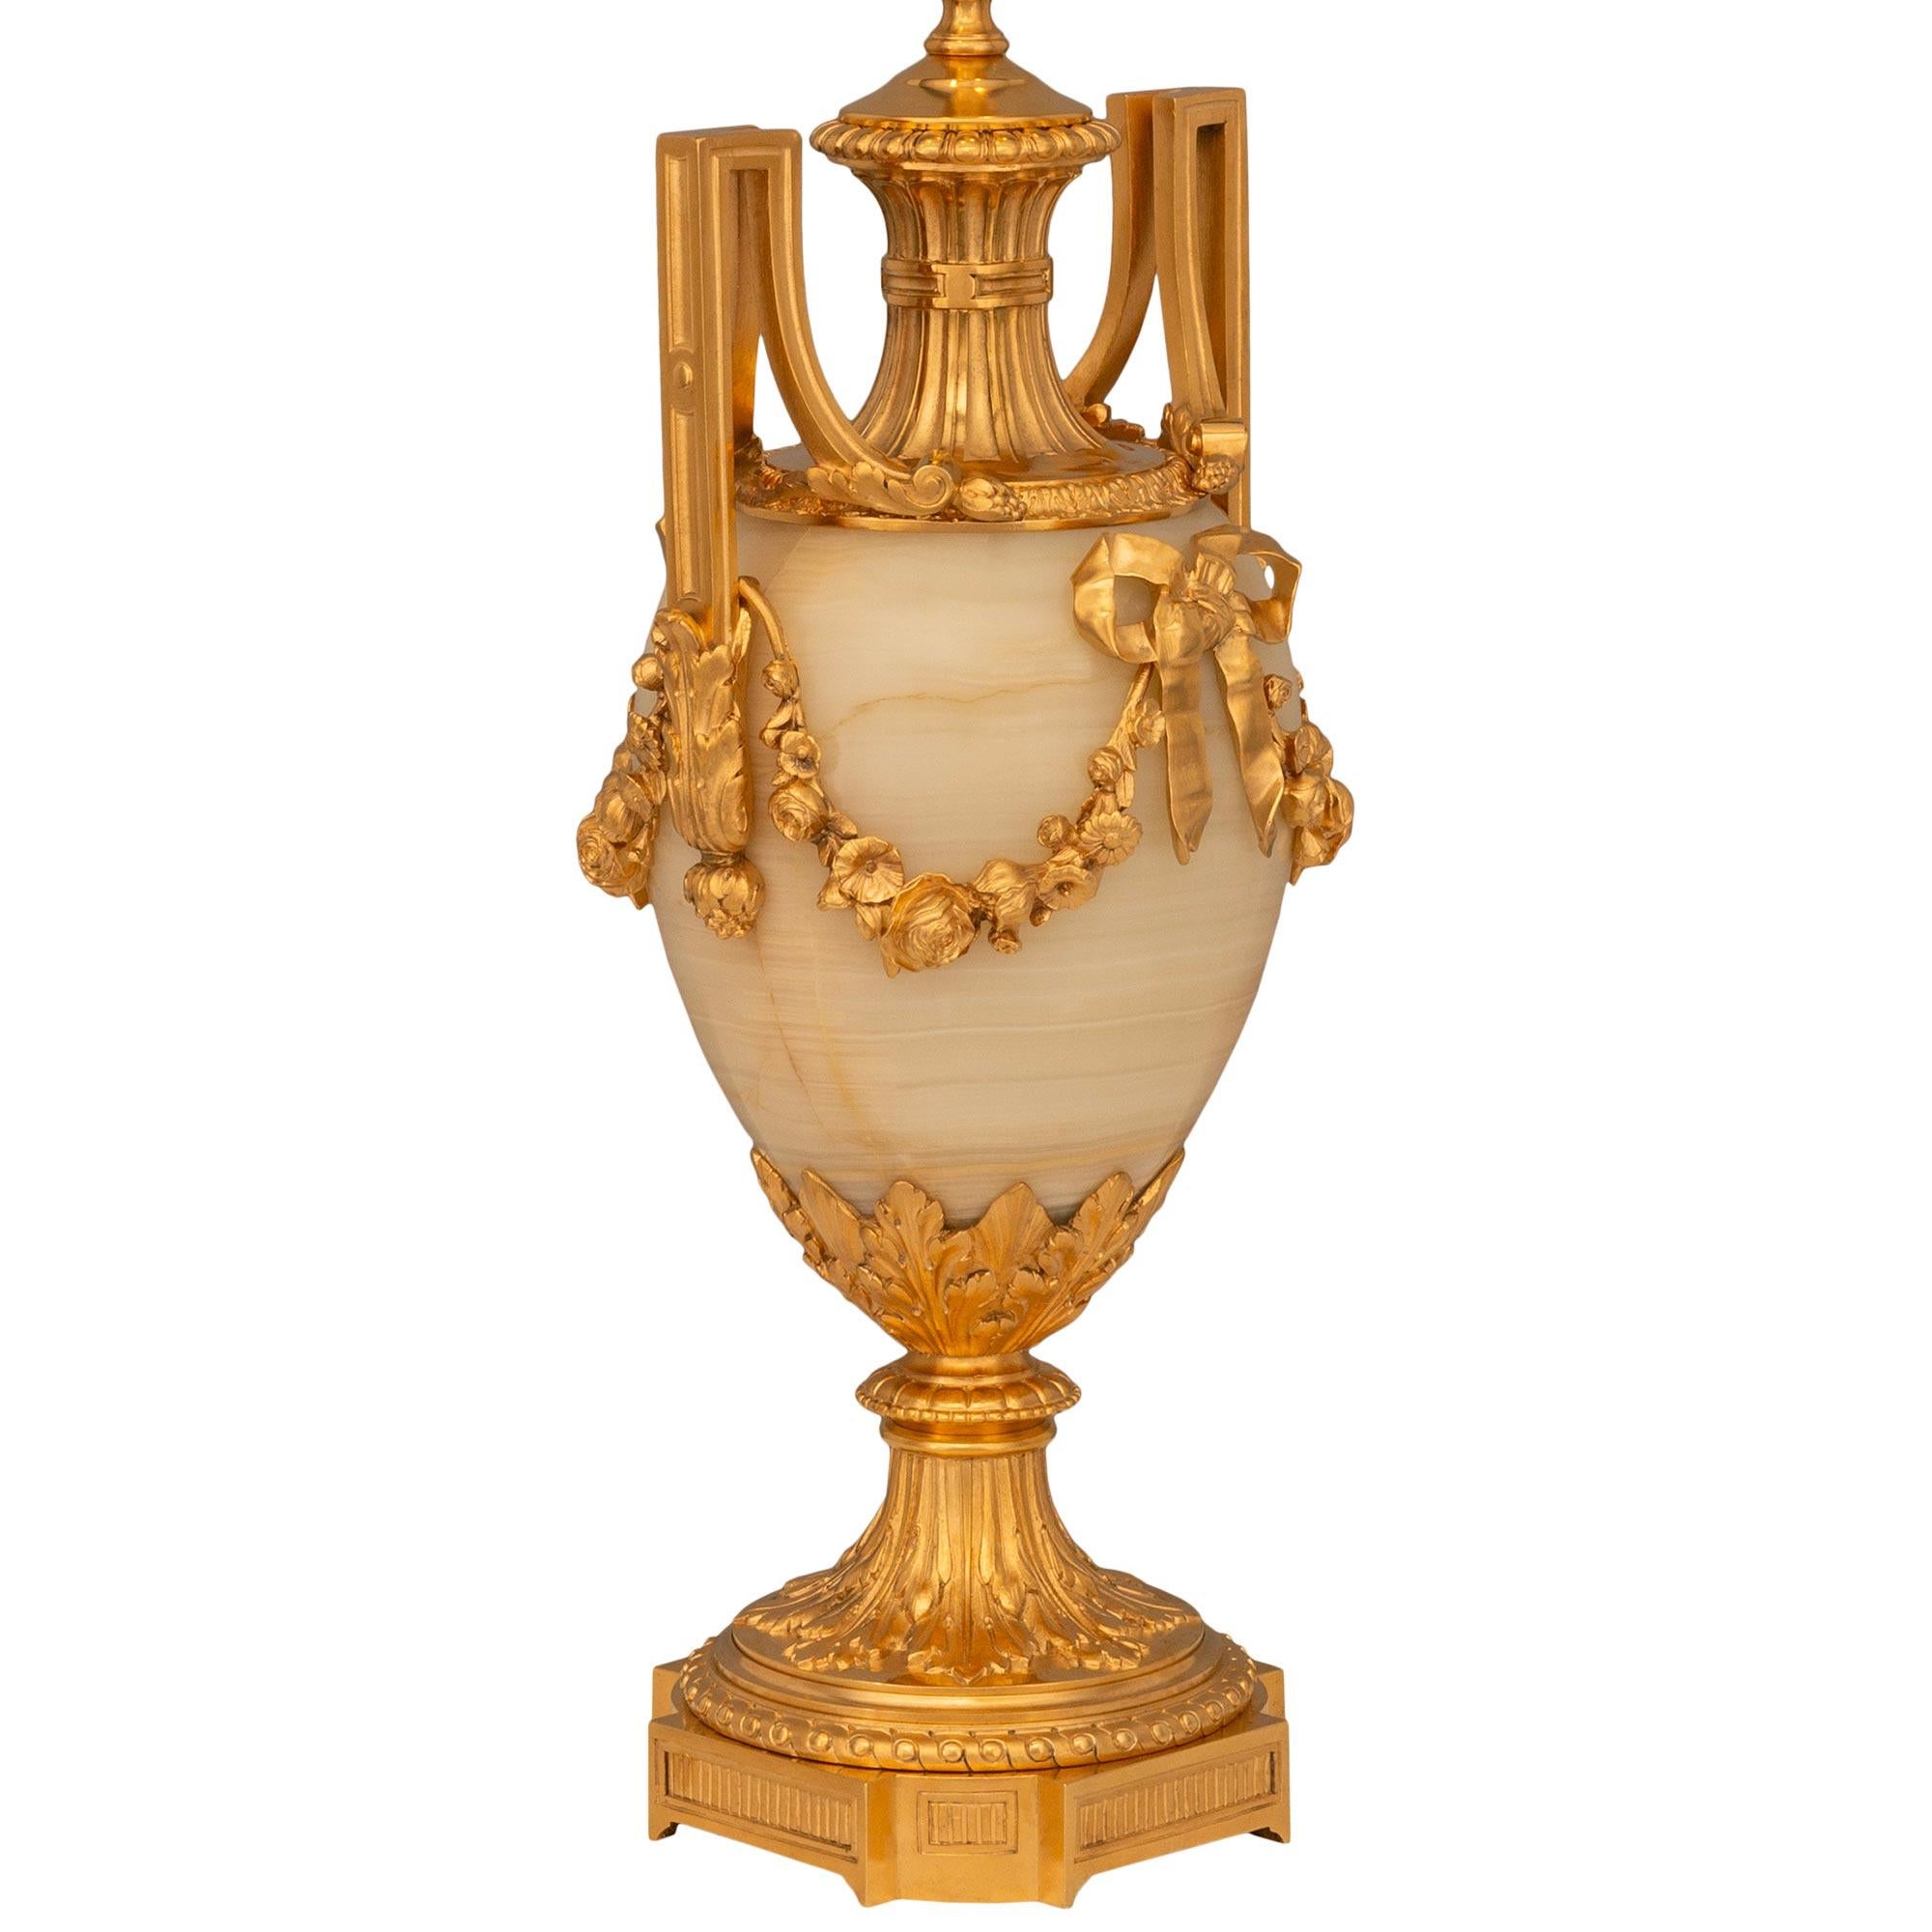 A beautiful and finely decorated pair of French 19th century Louis XVI st. Ormolu and Onyx lamps, signed Henri Picard. This wonderful pair is raised by a square pedestal with recessed corners and reeded panels. The socle above has a beaded and